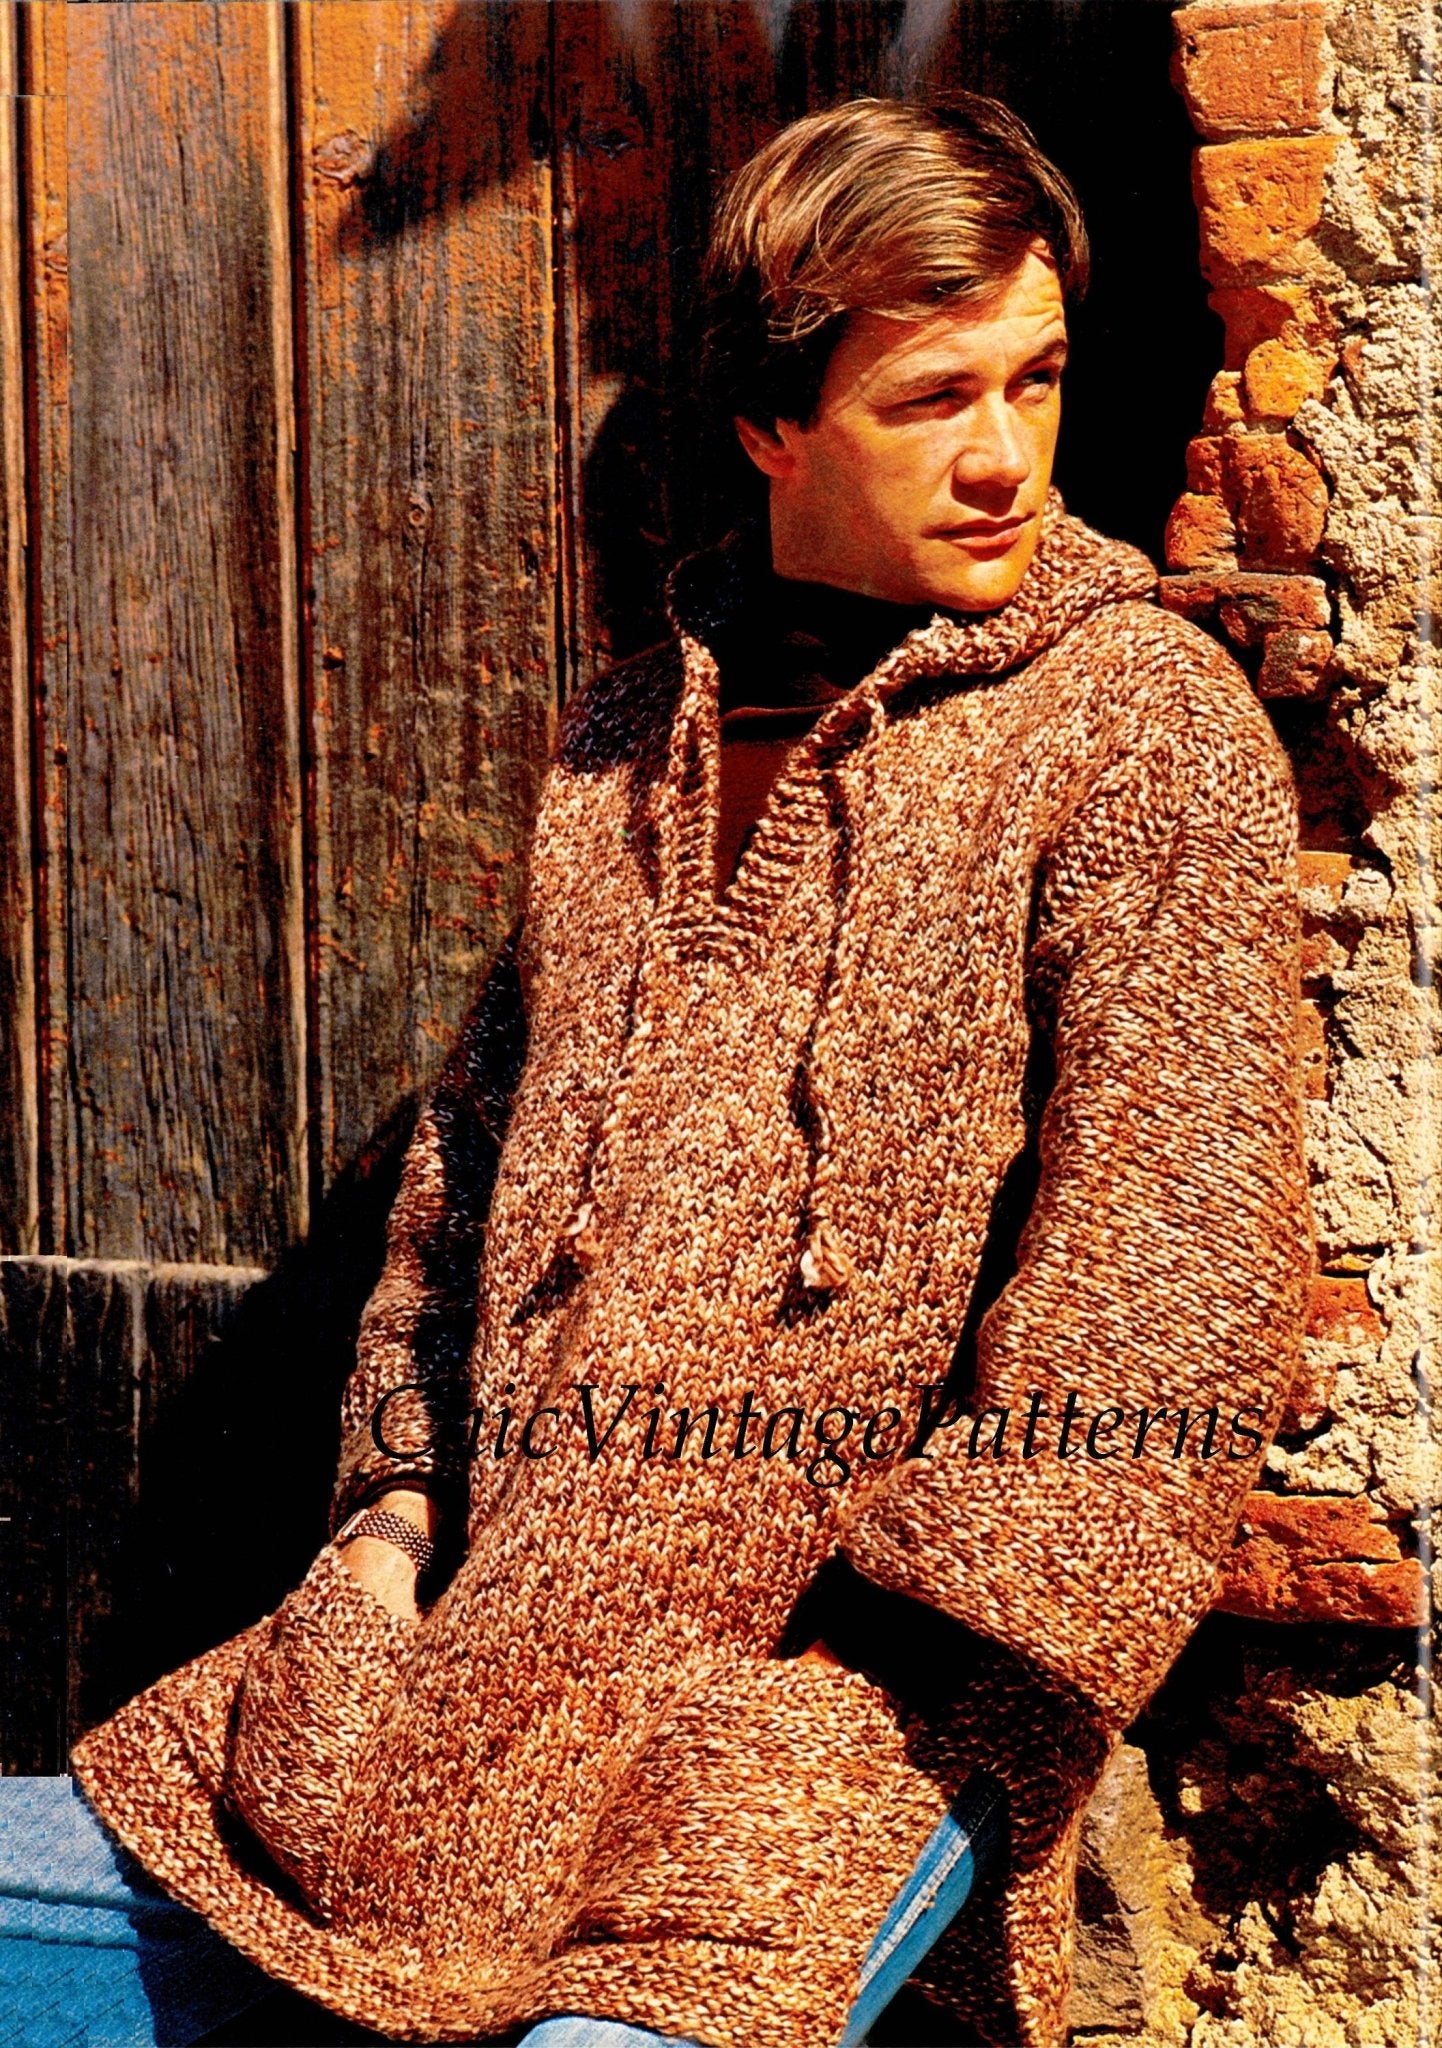 Mens Knitted Sweater, Vintage Hooded Sweater Pattern, Instant Download